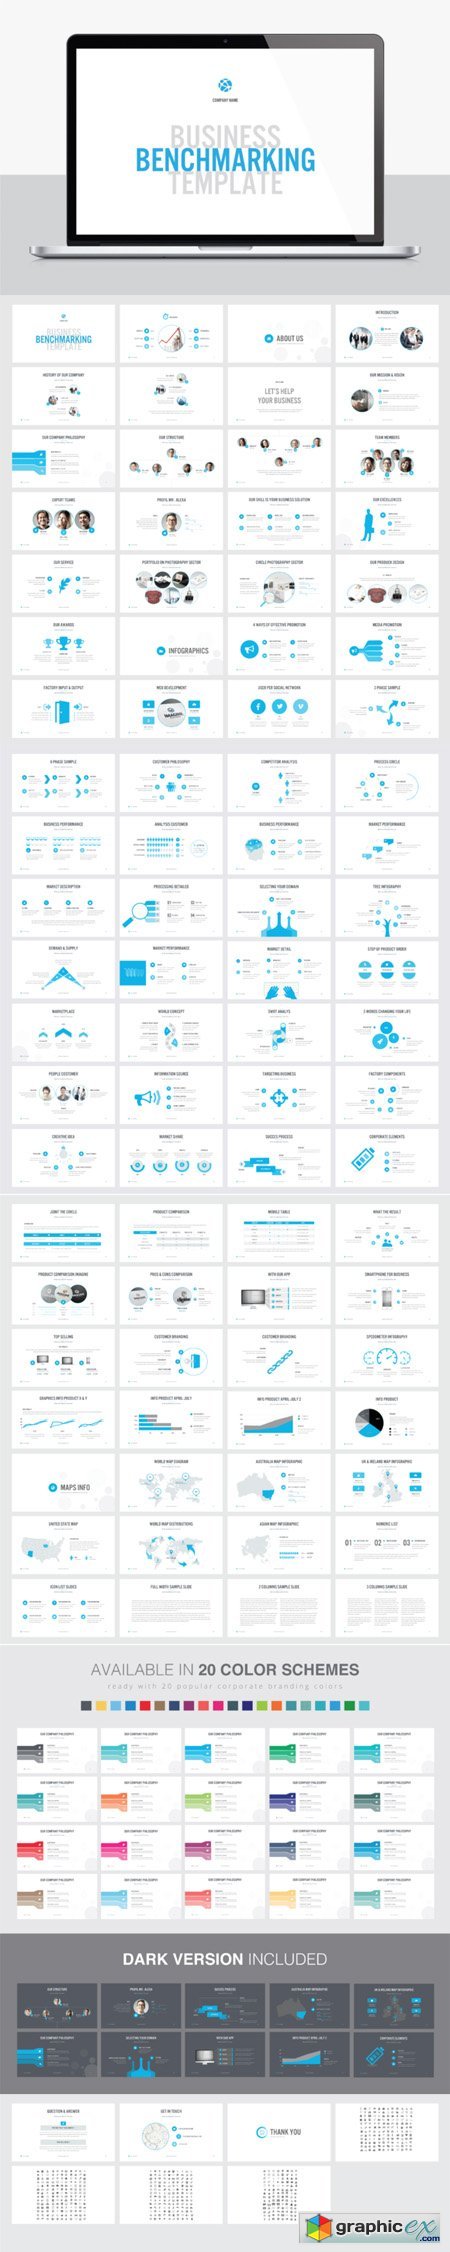 BENCHMARKING PowerPoint Template